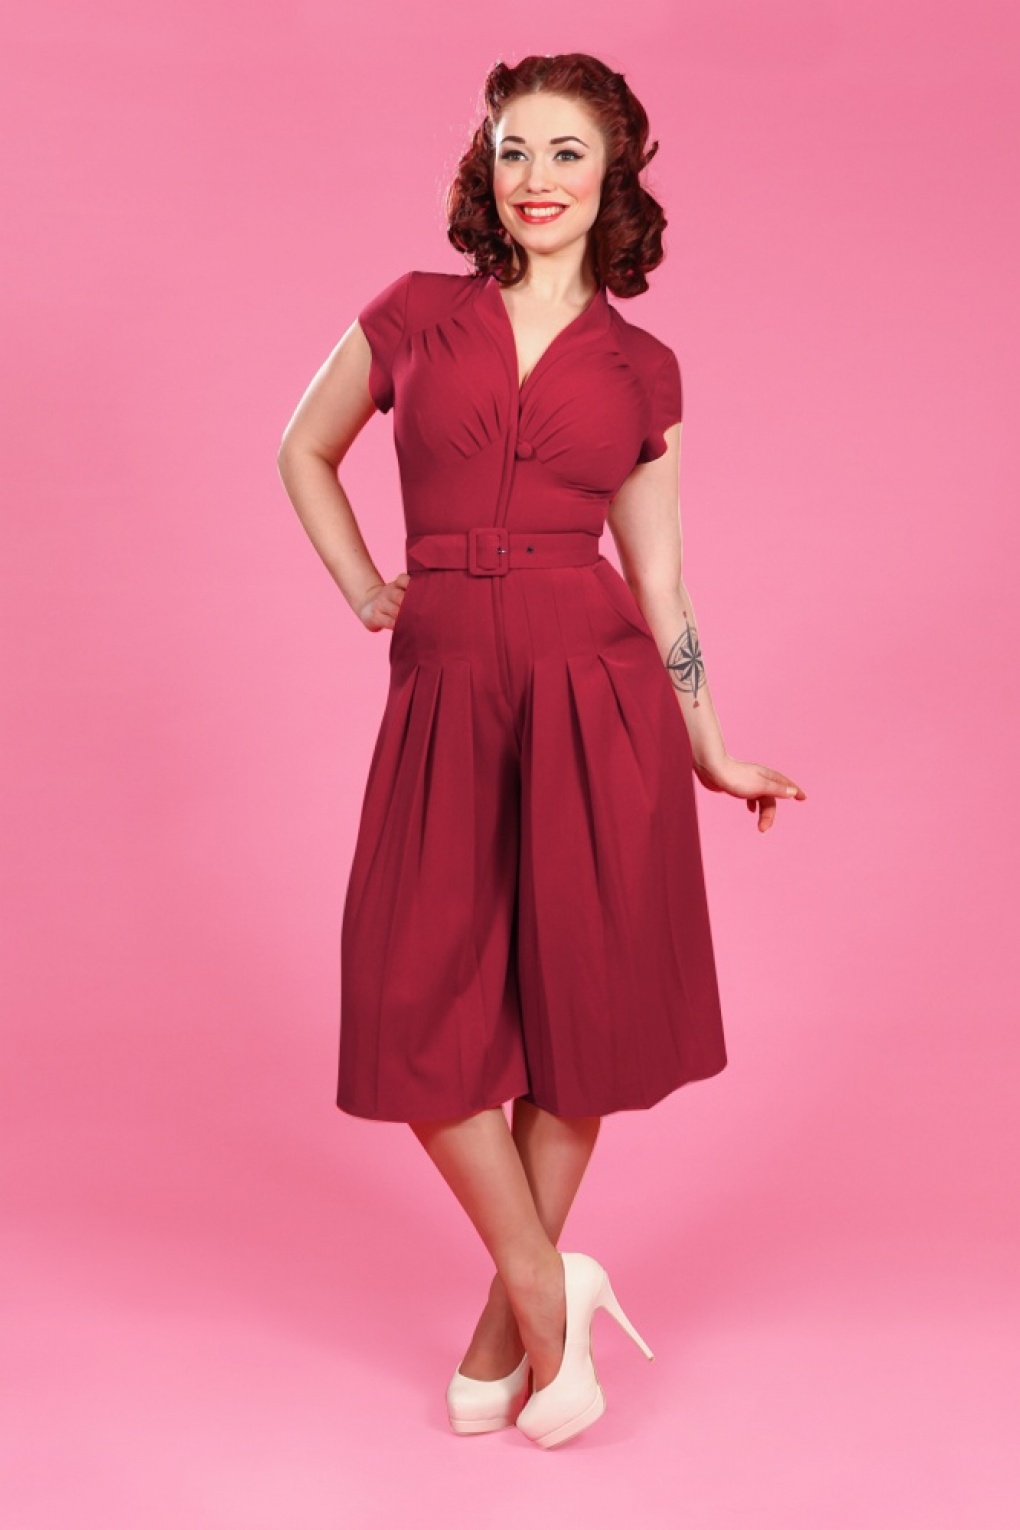 40s Sheila Pantskirt Playsuit in Sassy Red